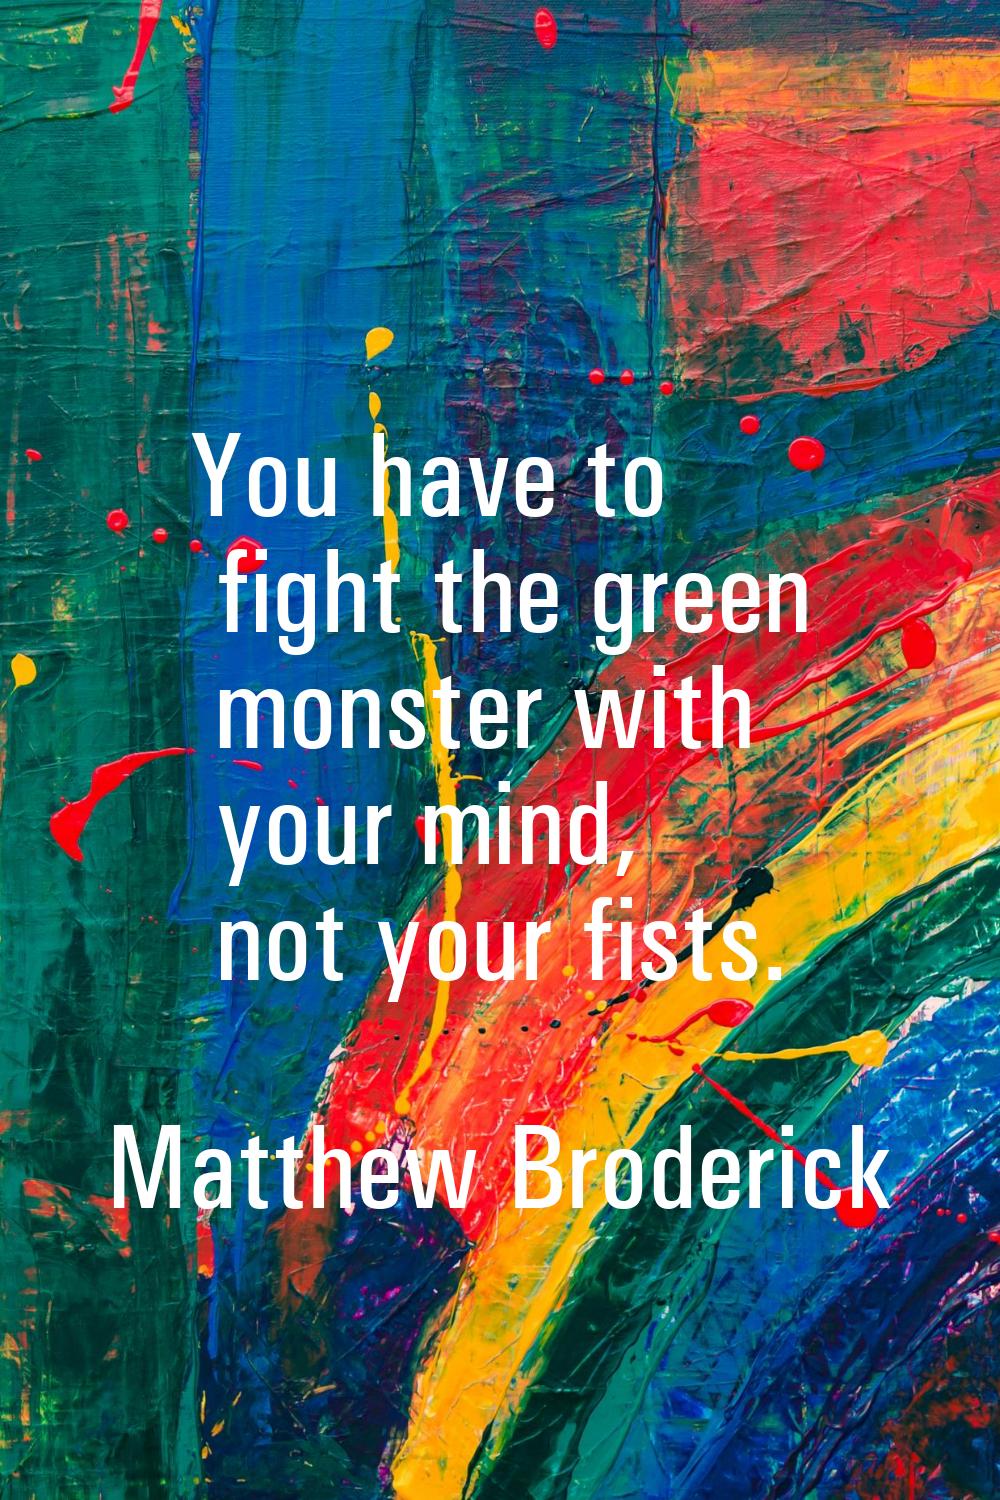 You have to fight the green monster with your mind, not your fists.